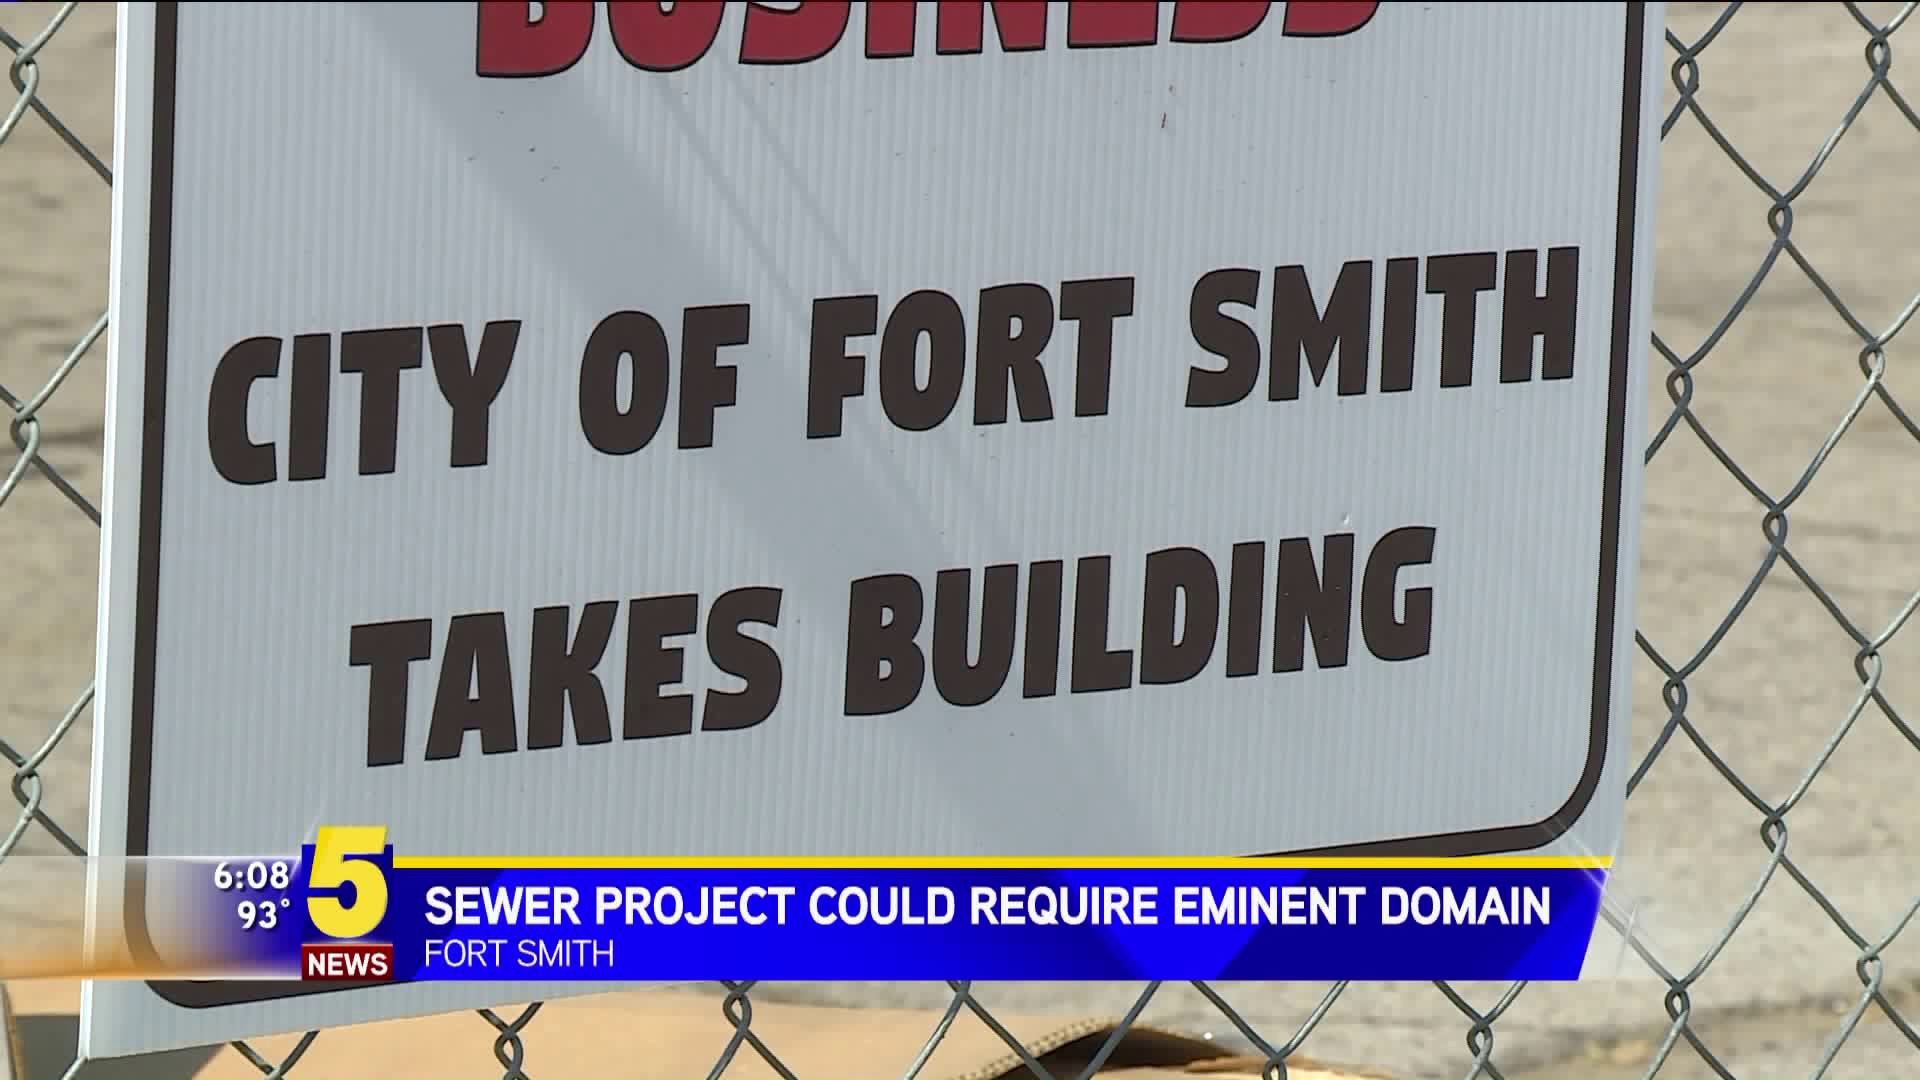 Sewer Project Could Require Eminent Domain